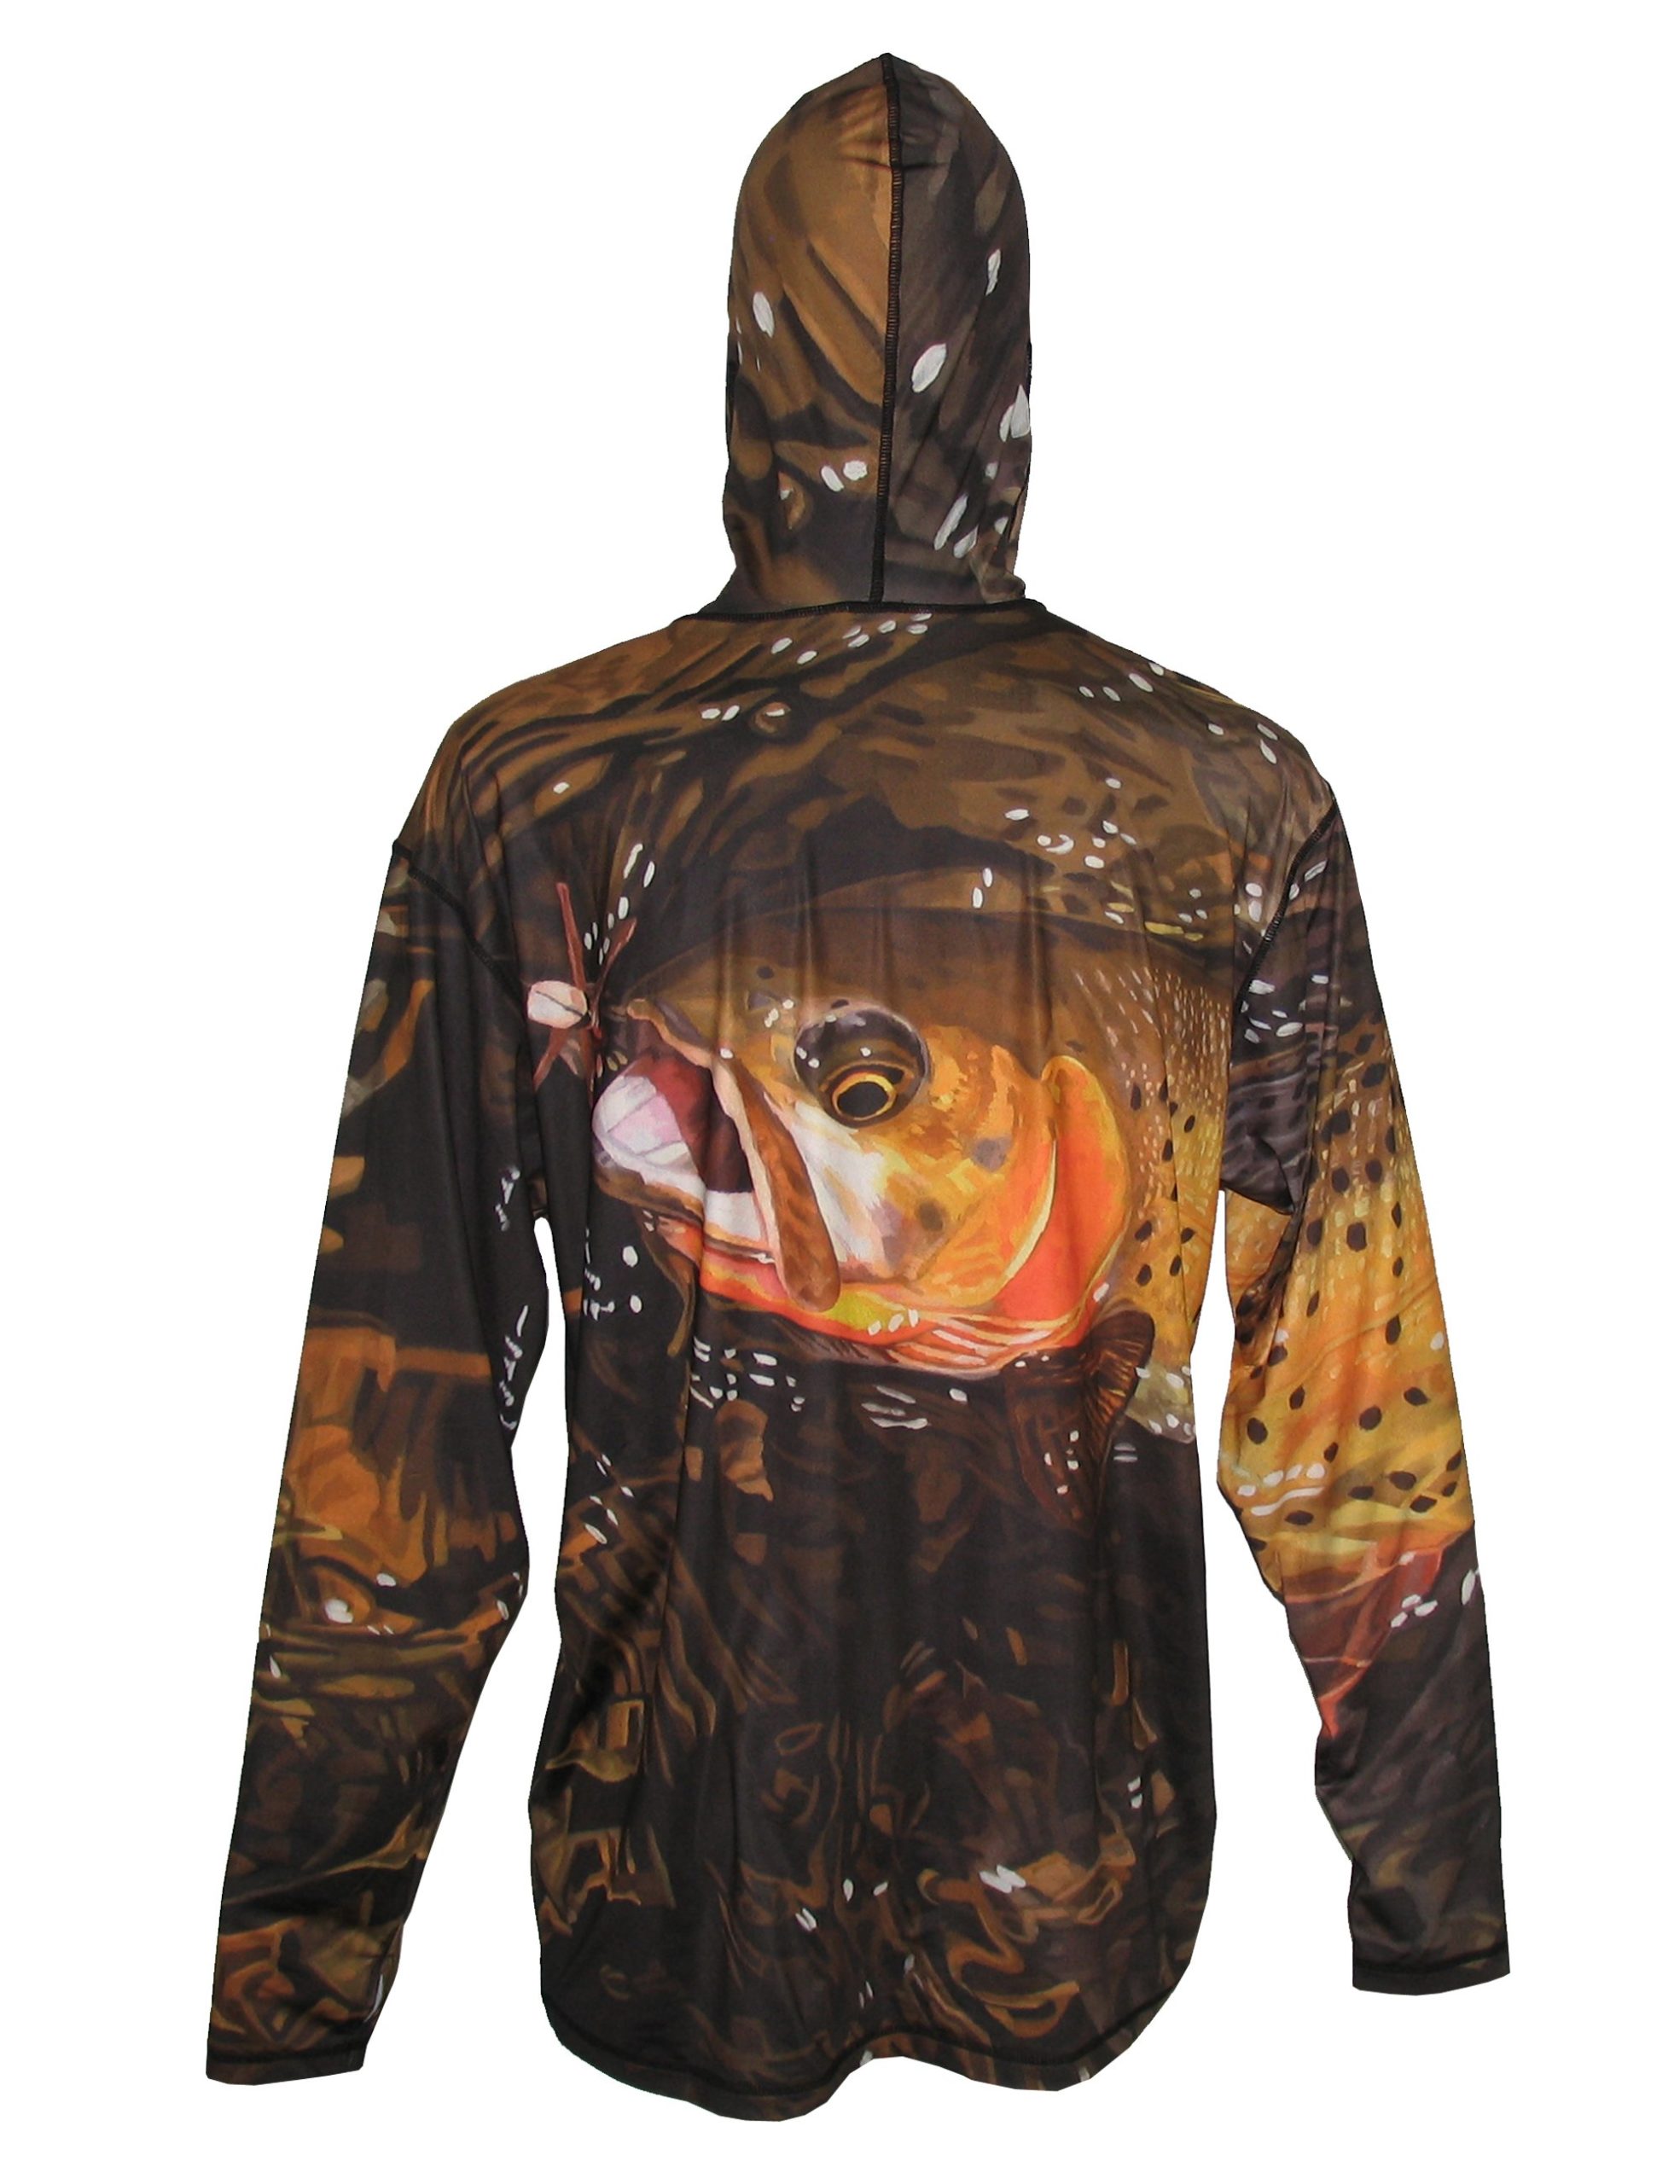 Cutty Graphic Fishing Hoodie is Fly Fishing Apparel on the trail as Hiking Clothes making life better. Get yours today Enjoy Life Click Here